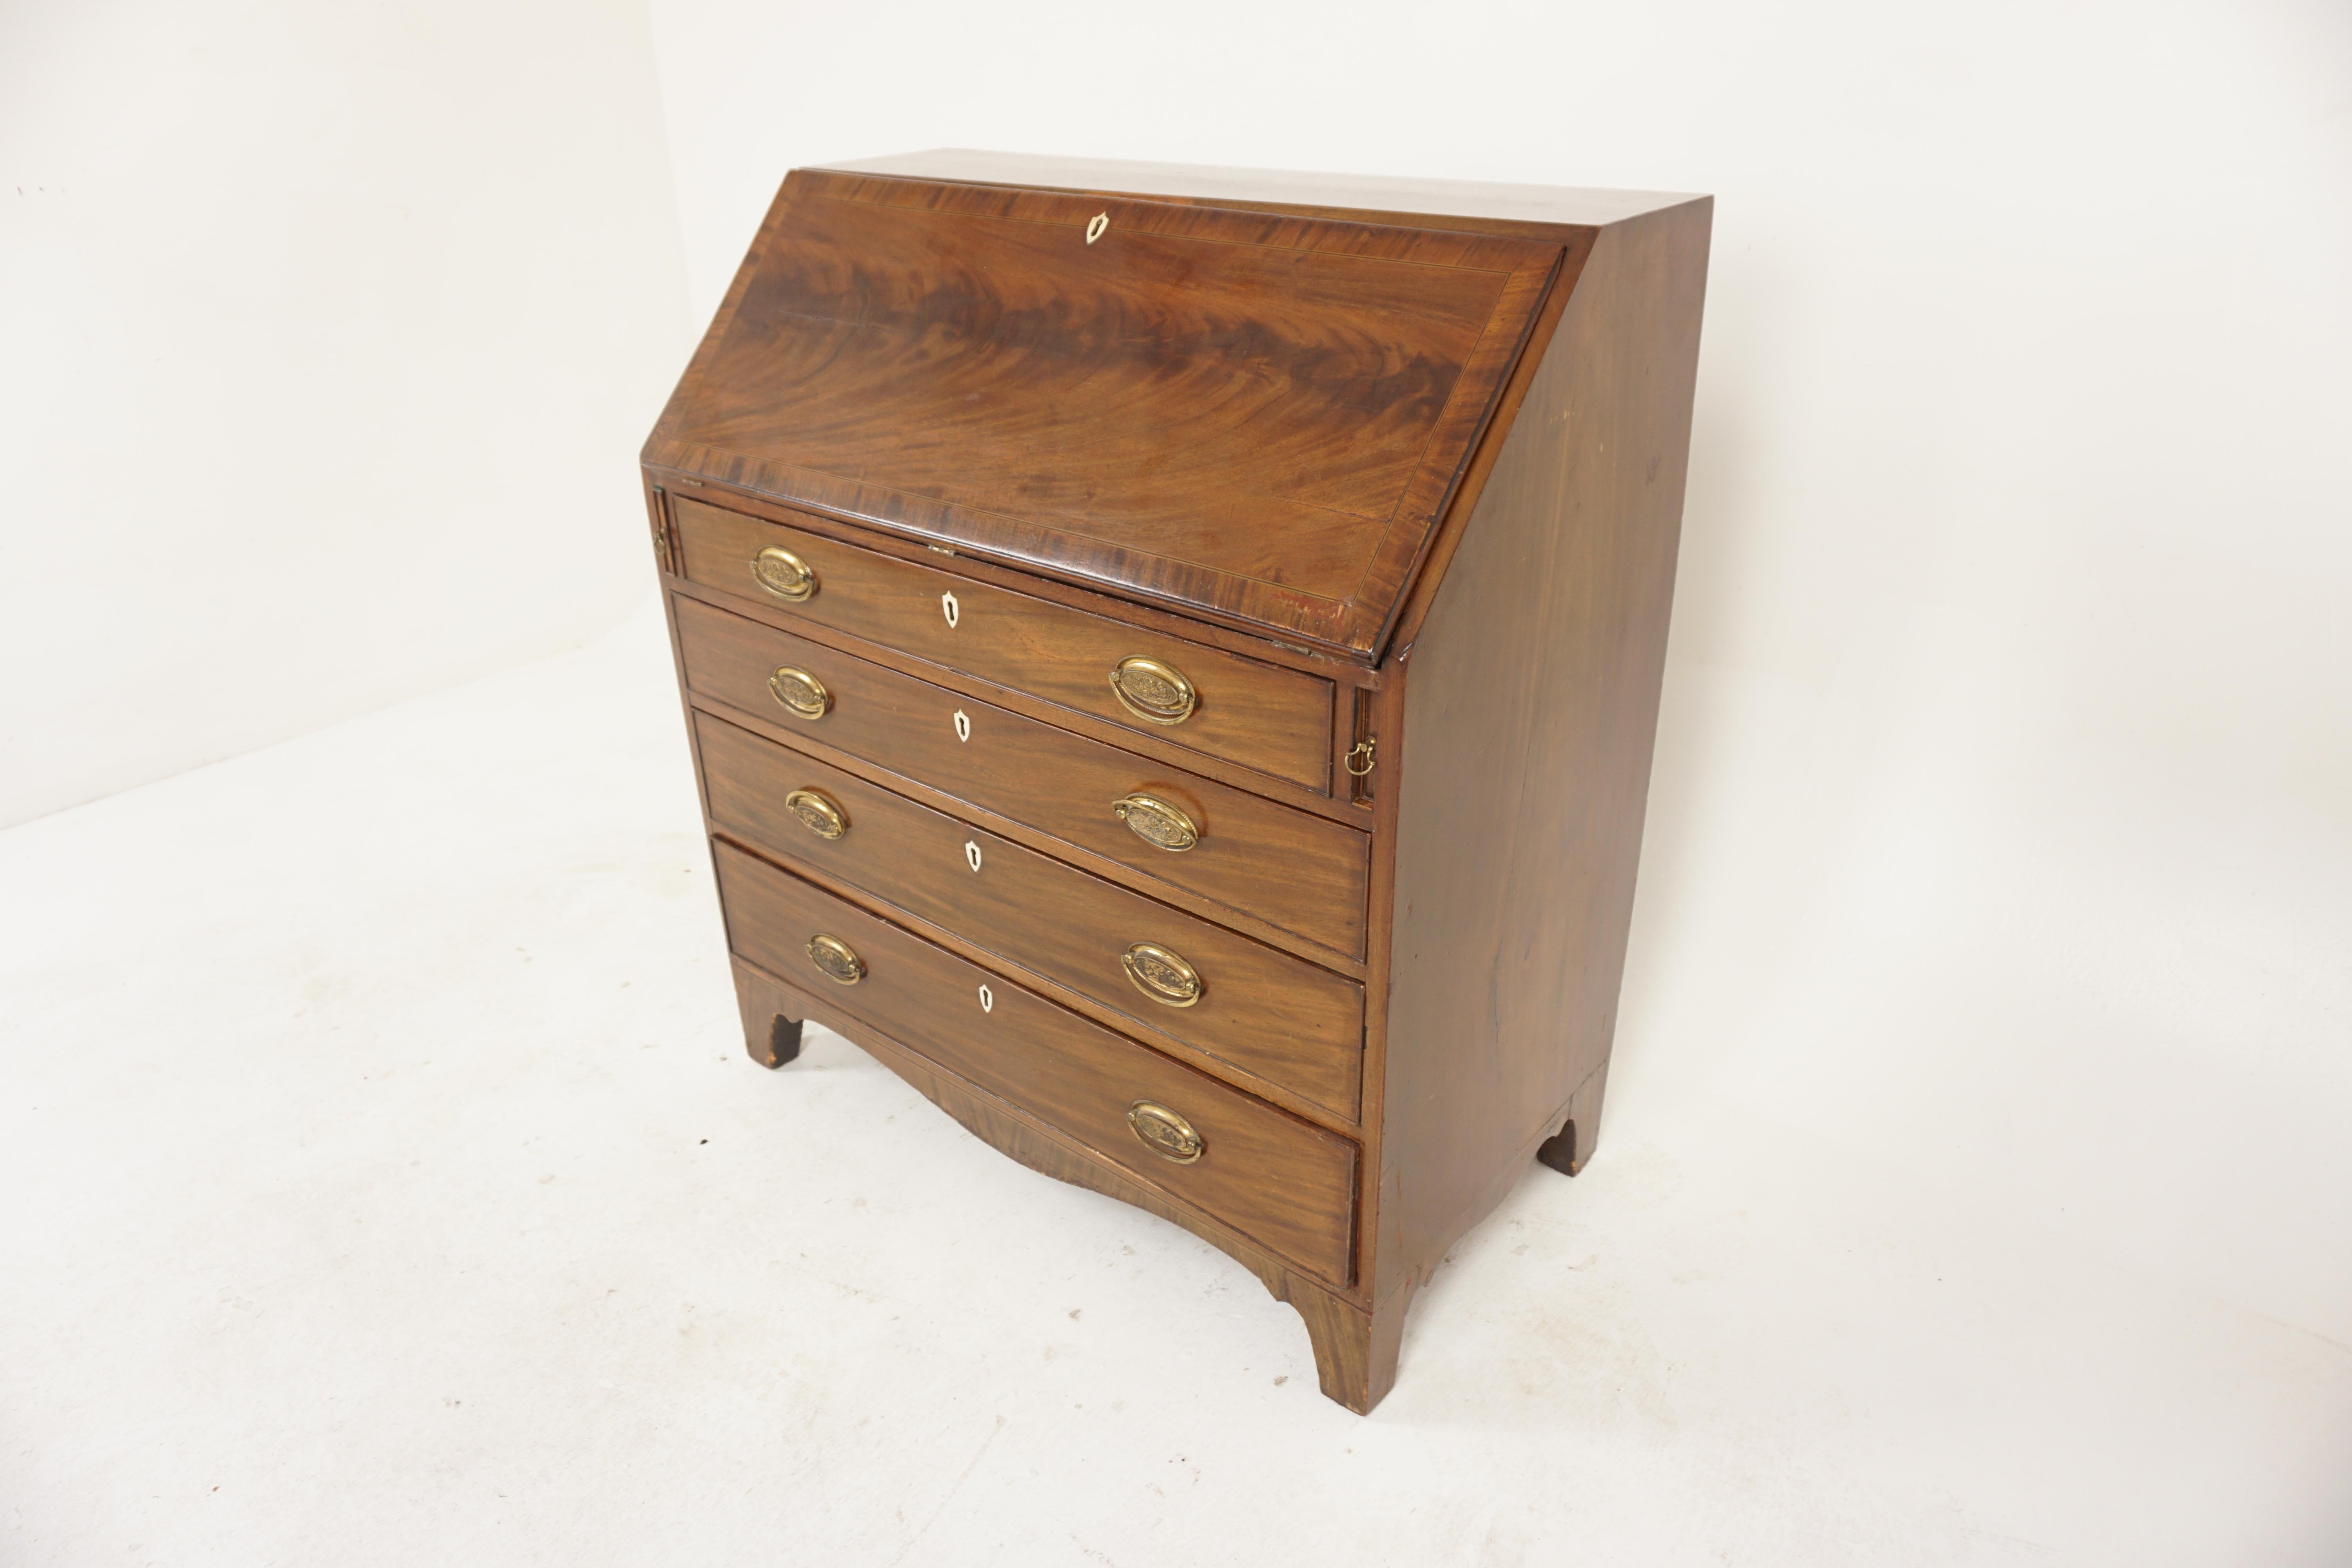 Antique Figured Walnut Inlaid Bureau Desk,  Writing Desk, Scotland 1810, H1166

Scotland 1810
Solid Walnut
Original finish
Rectangular top
Cross banded fall front
The interior of the desk has a wonderful inlaid center cupboard 
With and arcaded